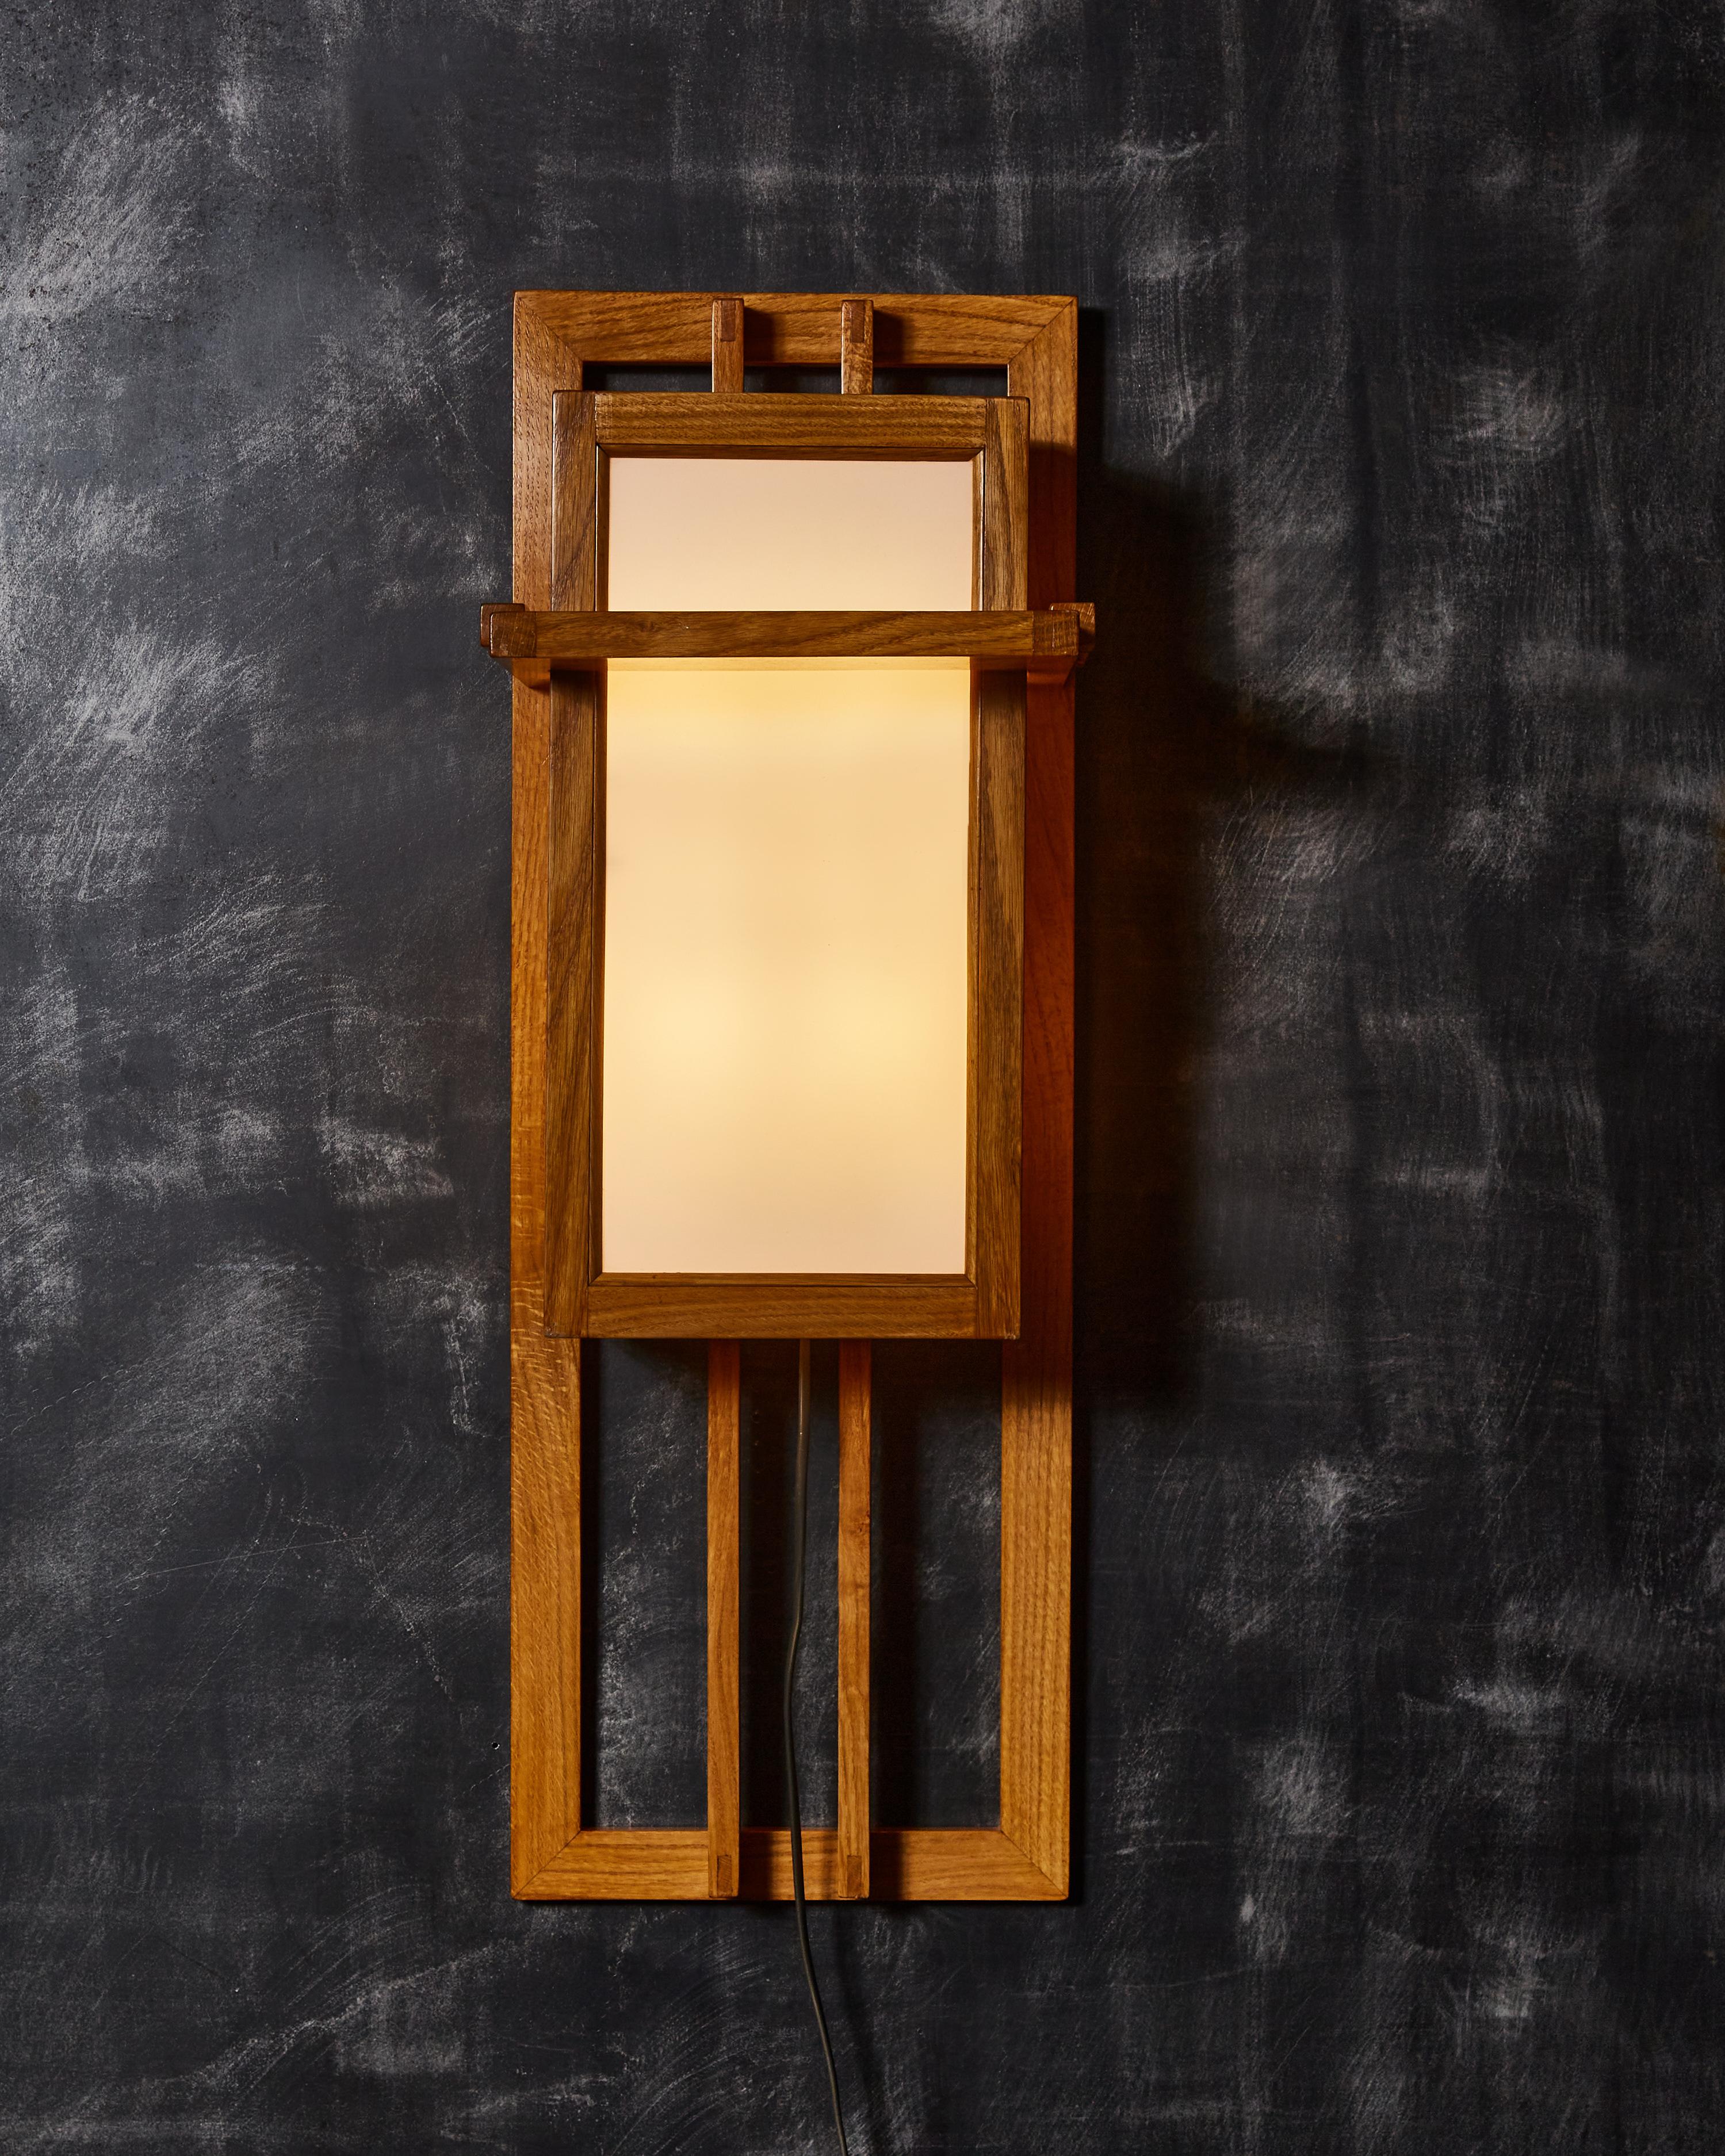 Pair of wall sconces made of a geometrical wood structure and white frosted glass panels. Four lights per sconce.